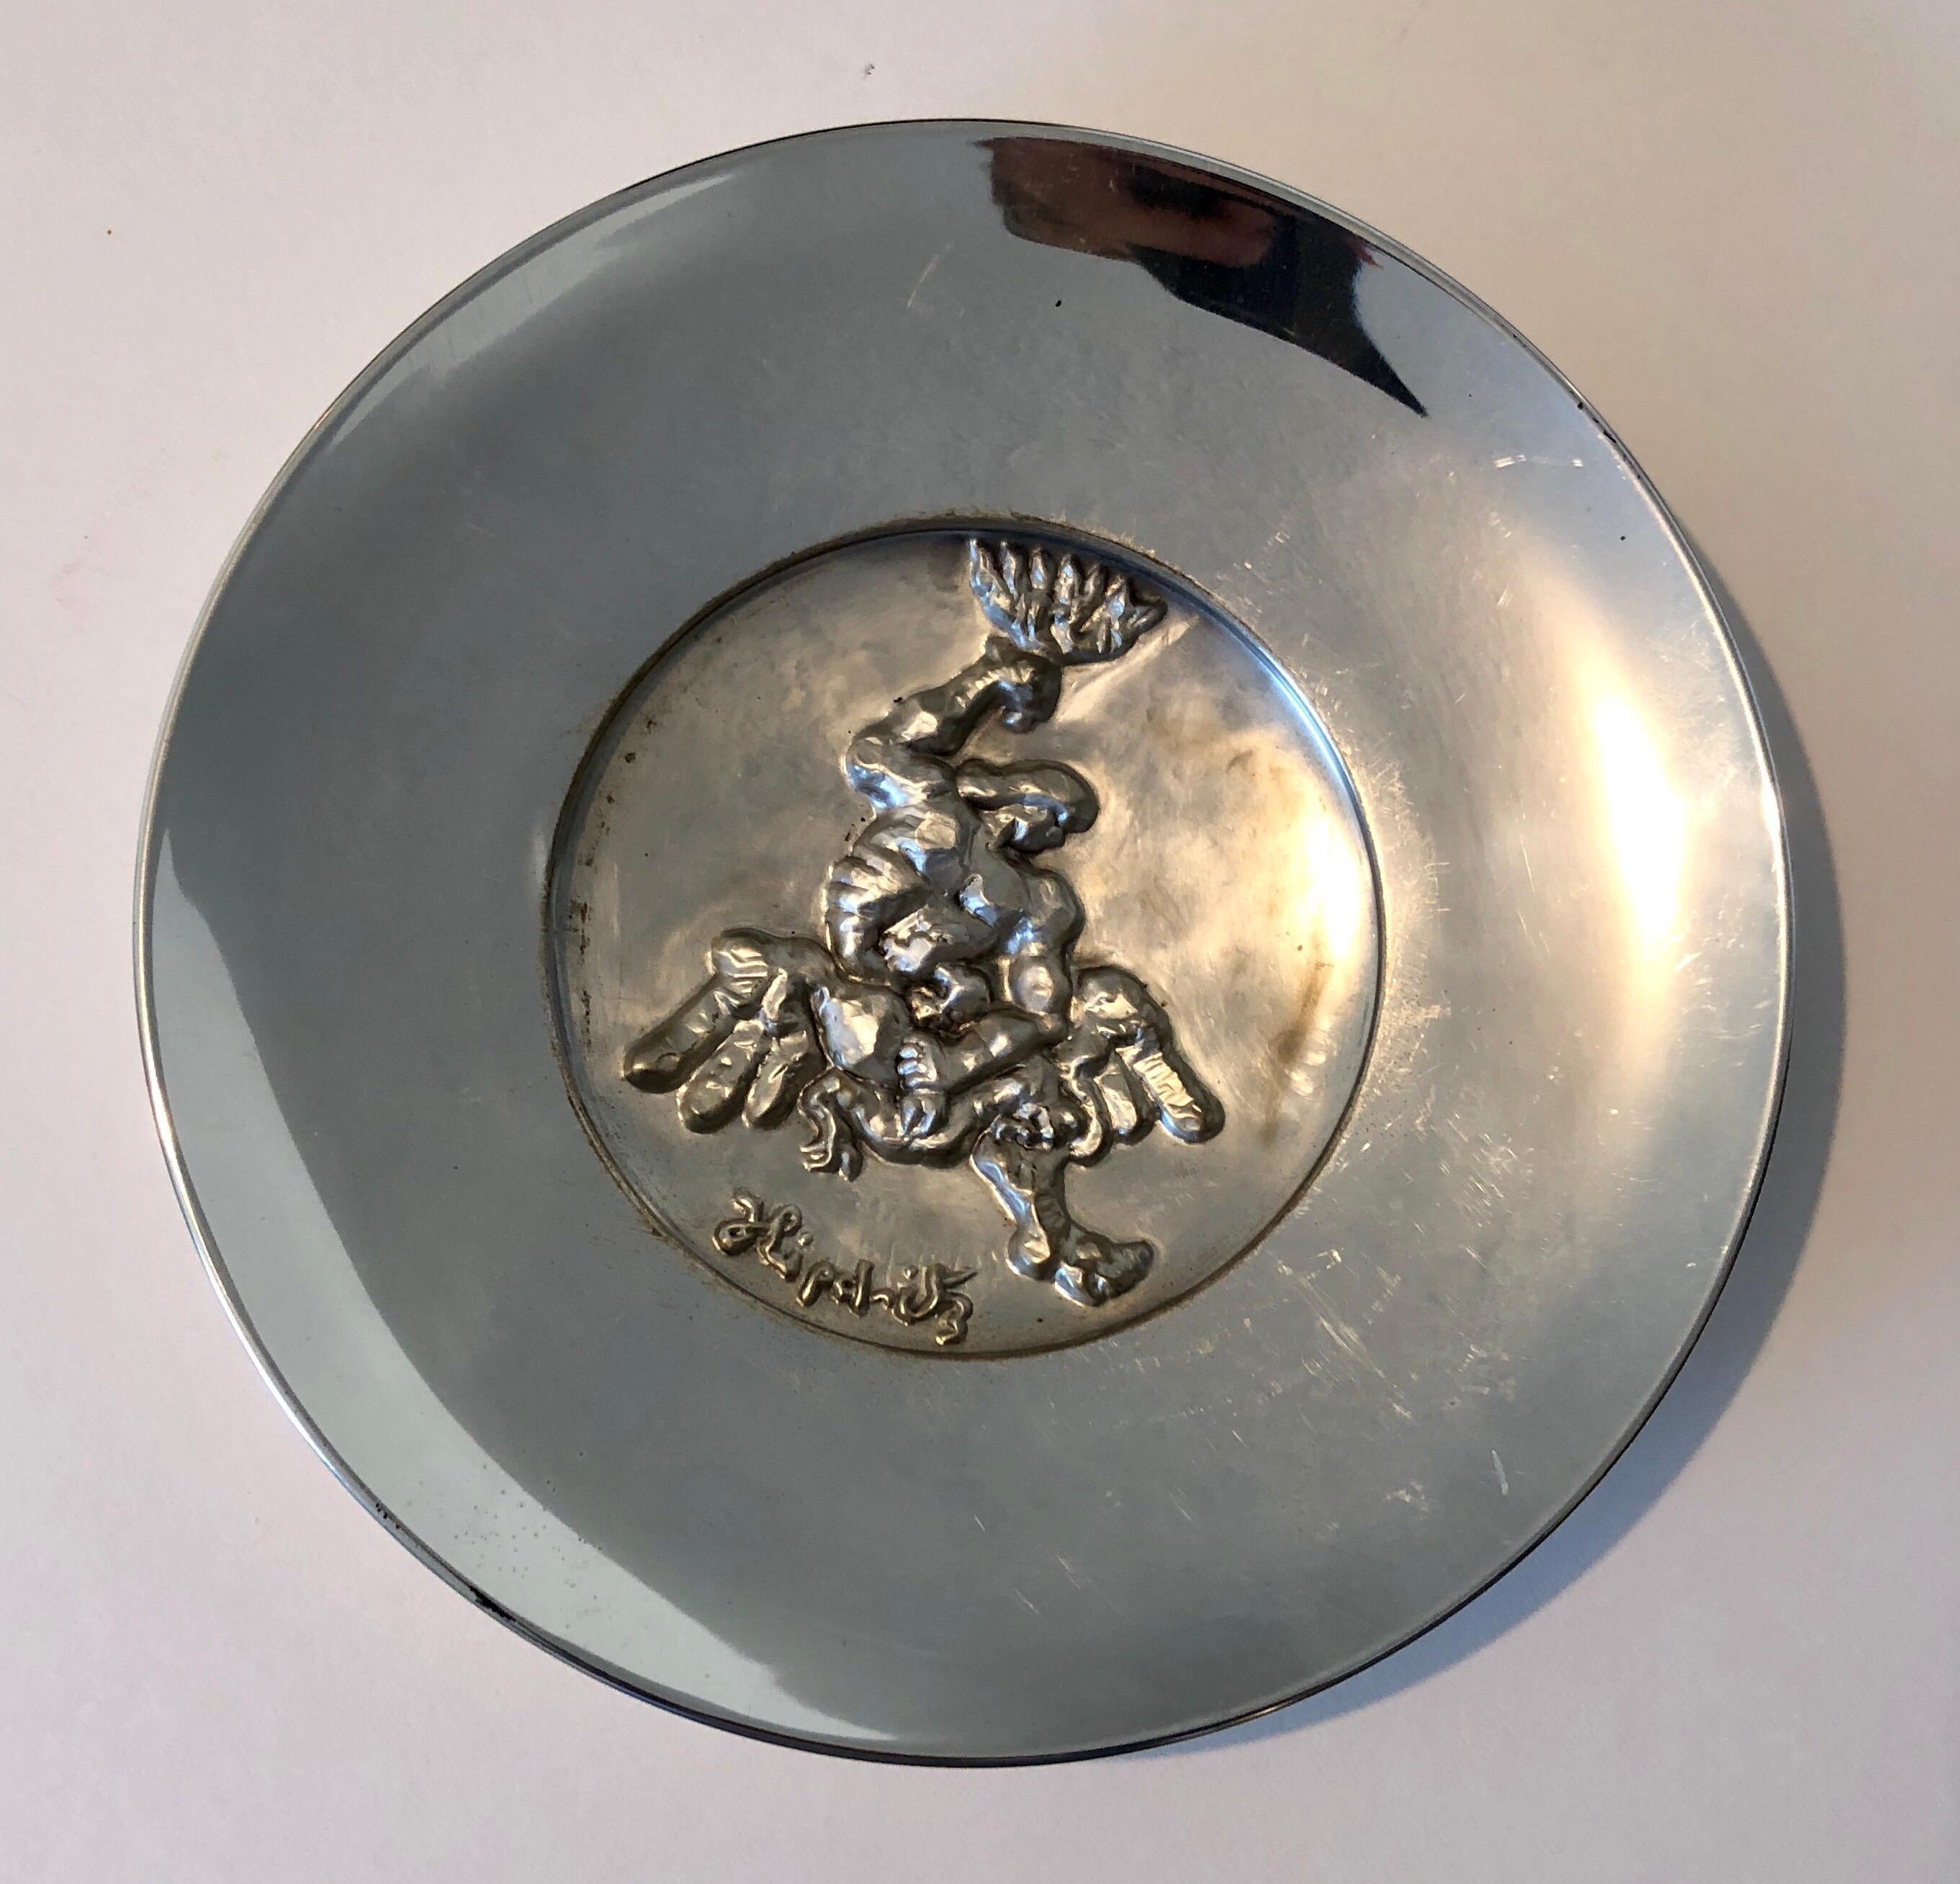 Sculptor Jacques Lipchitz Terling Silver Anniversary Silver Sculpture Plate Israel
This is a beautiful sterling silver commemorative plate. It was specially made for the Silver Anniversary of Israel. It was designed by the famous artist Jacques